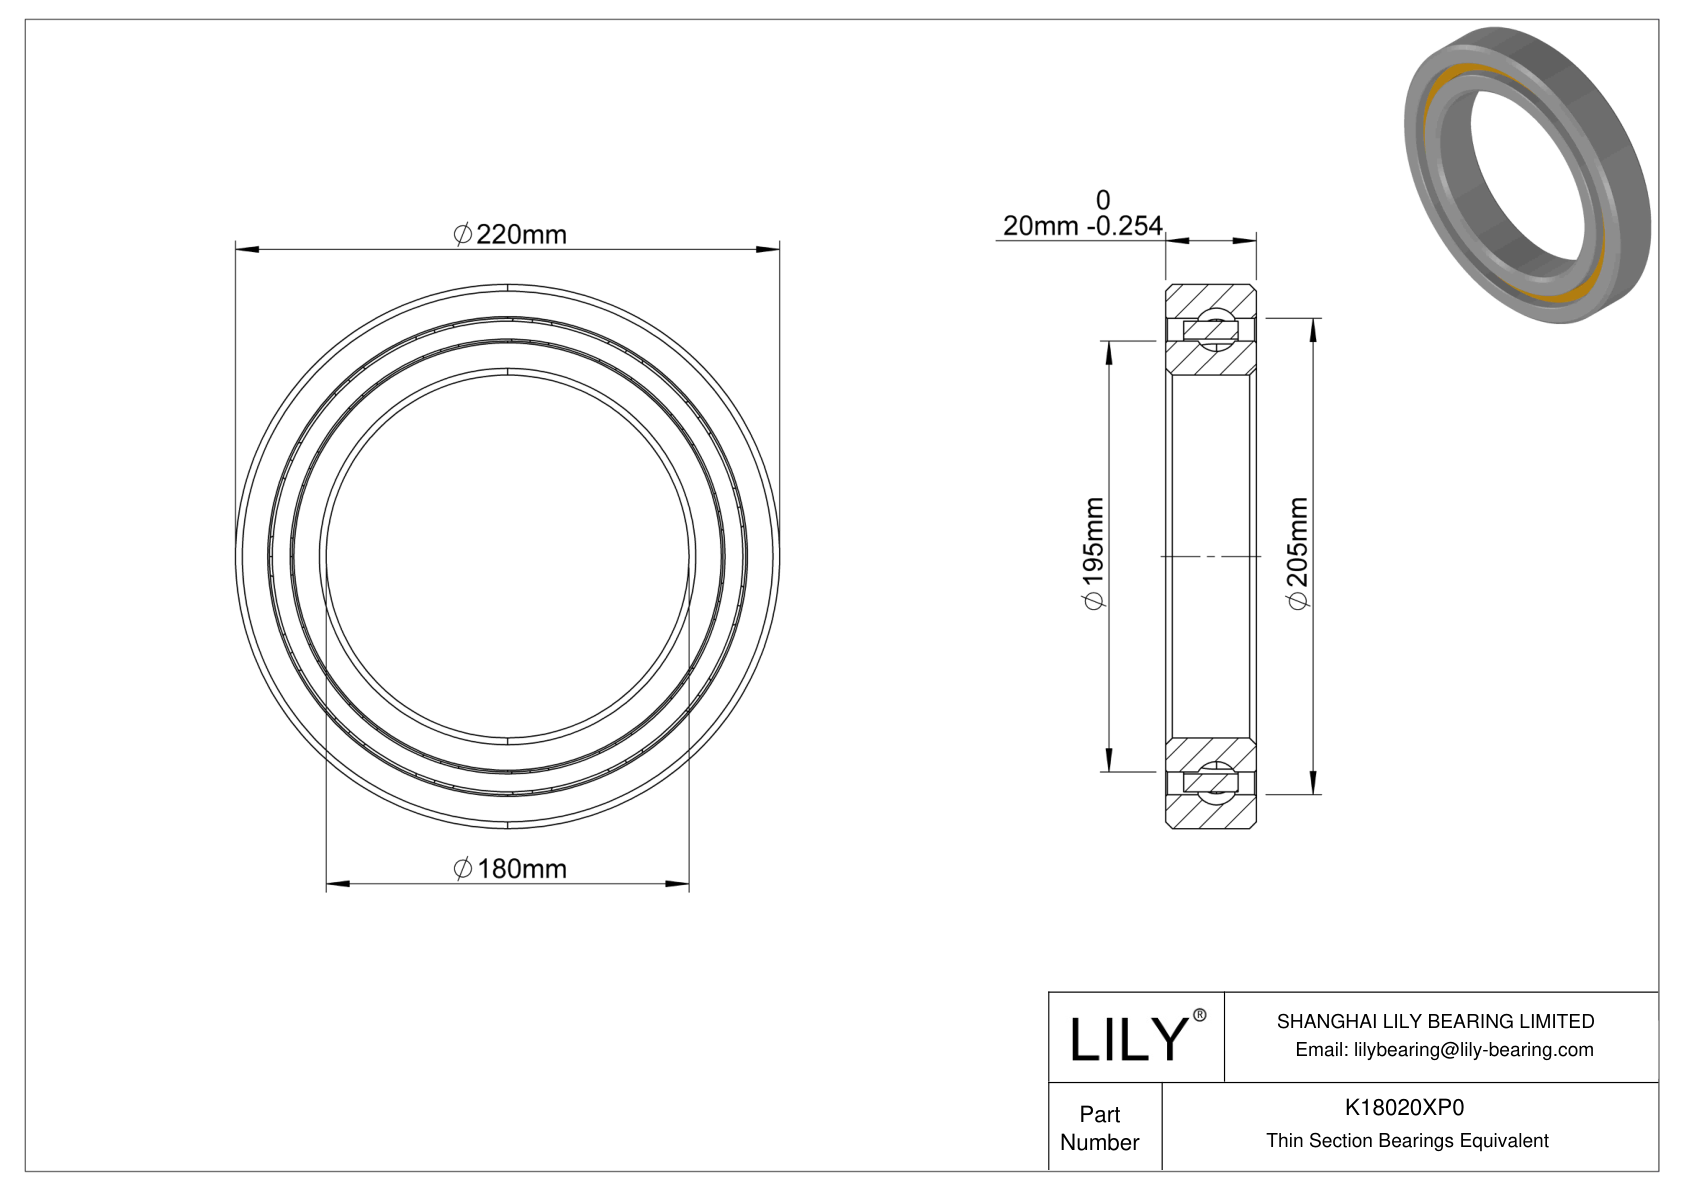 K18020XP0 Constant Section (CS) Bearings cad drawing